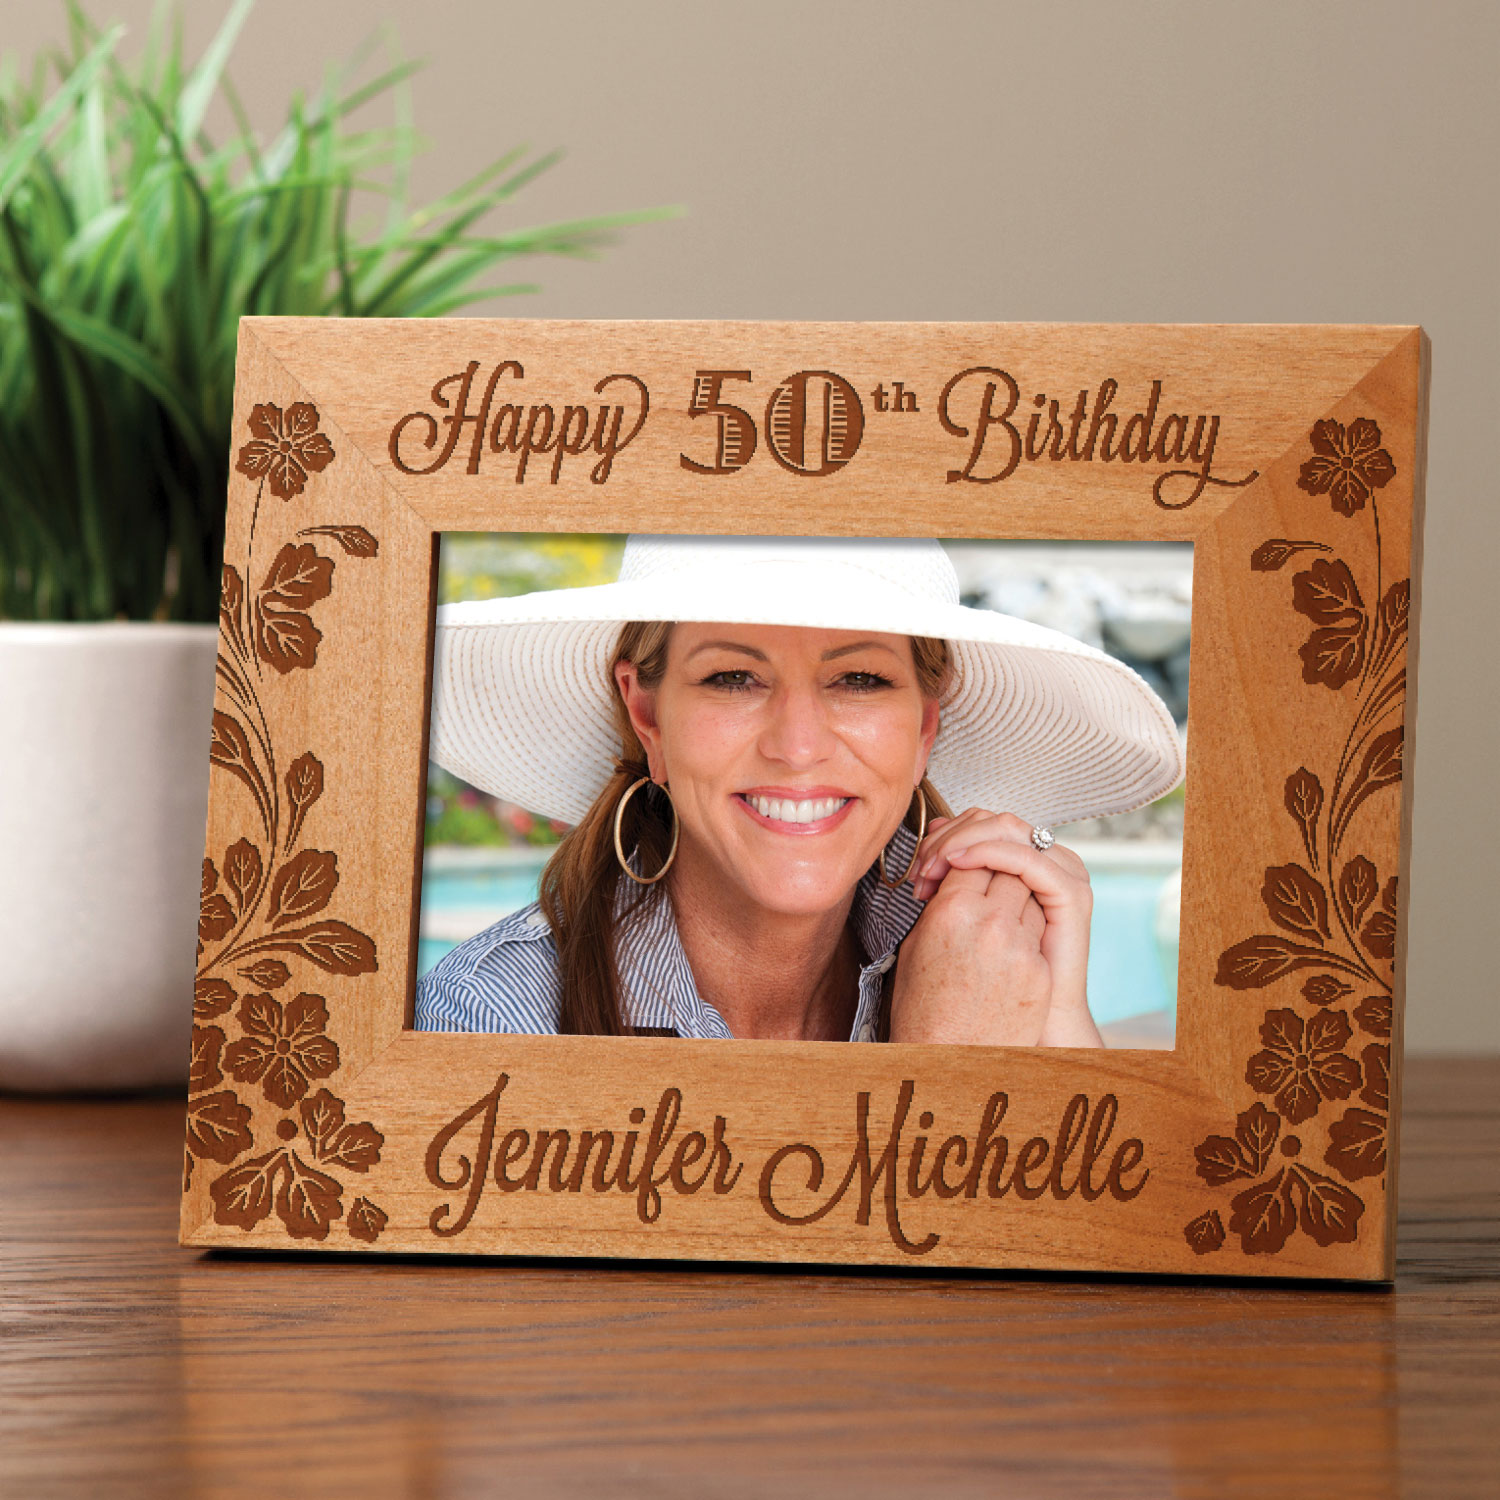 Her Birthday Personalized Frame